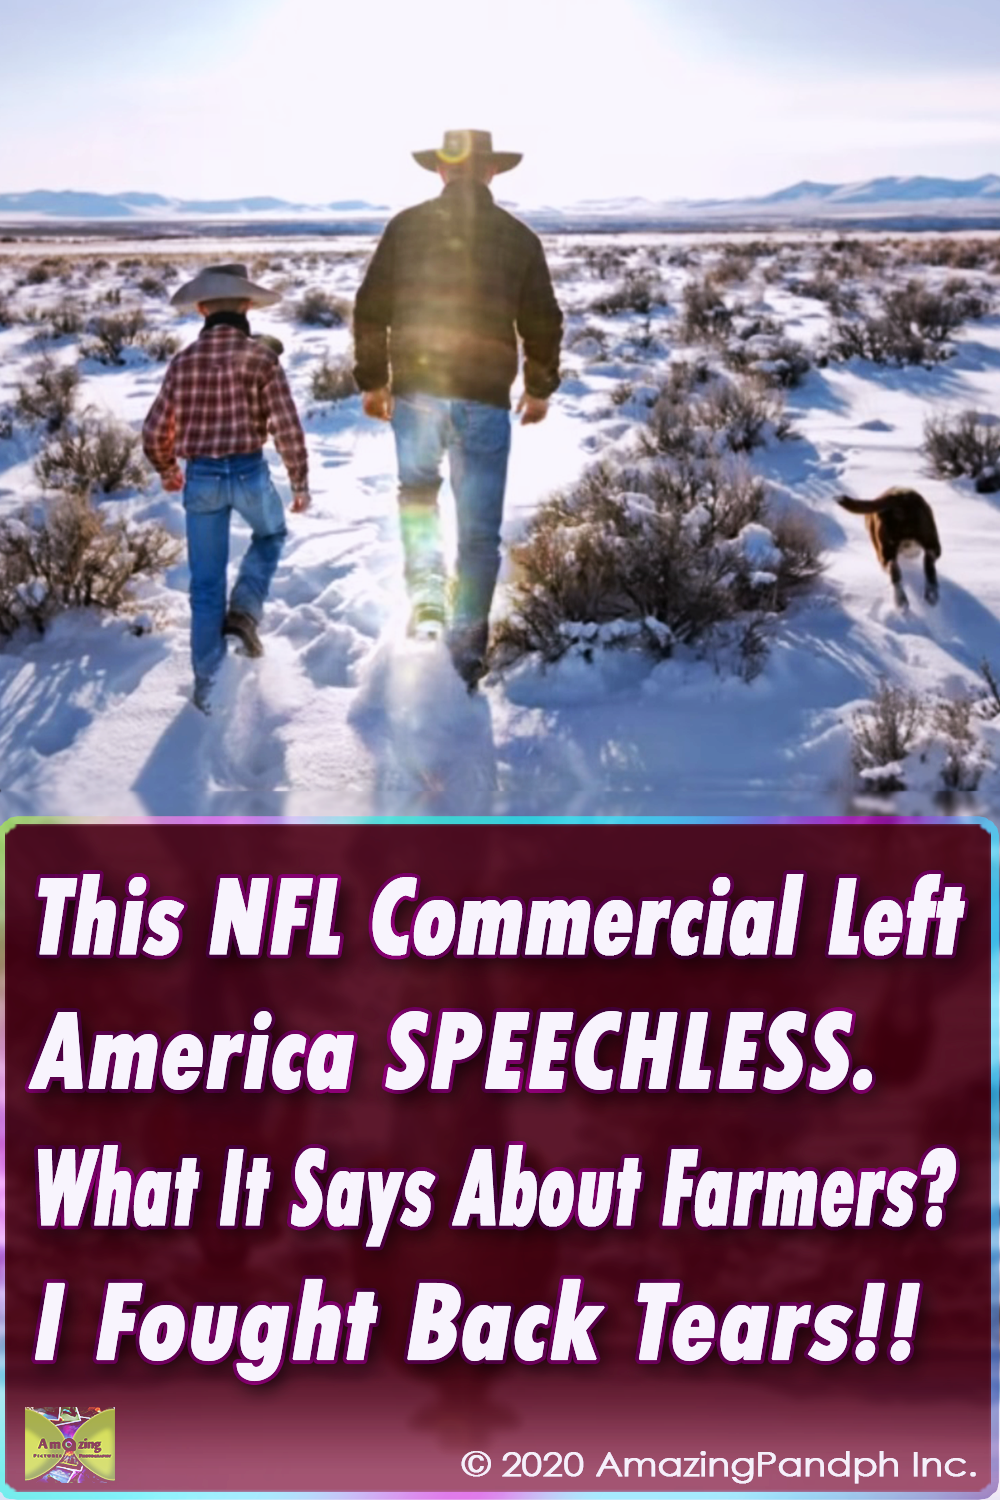 best commercial ever,most viewed ads,most shared,most watched,most liked,viral,video,best of,amazing videos,america commercial videos,best commercial,farmers commercial,video for farmers,best farmers video